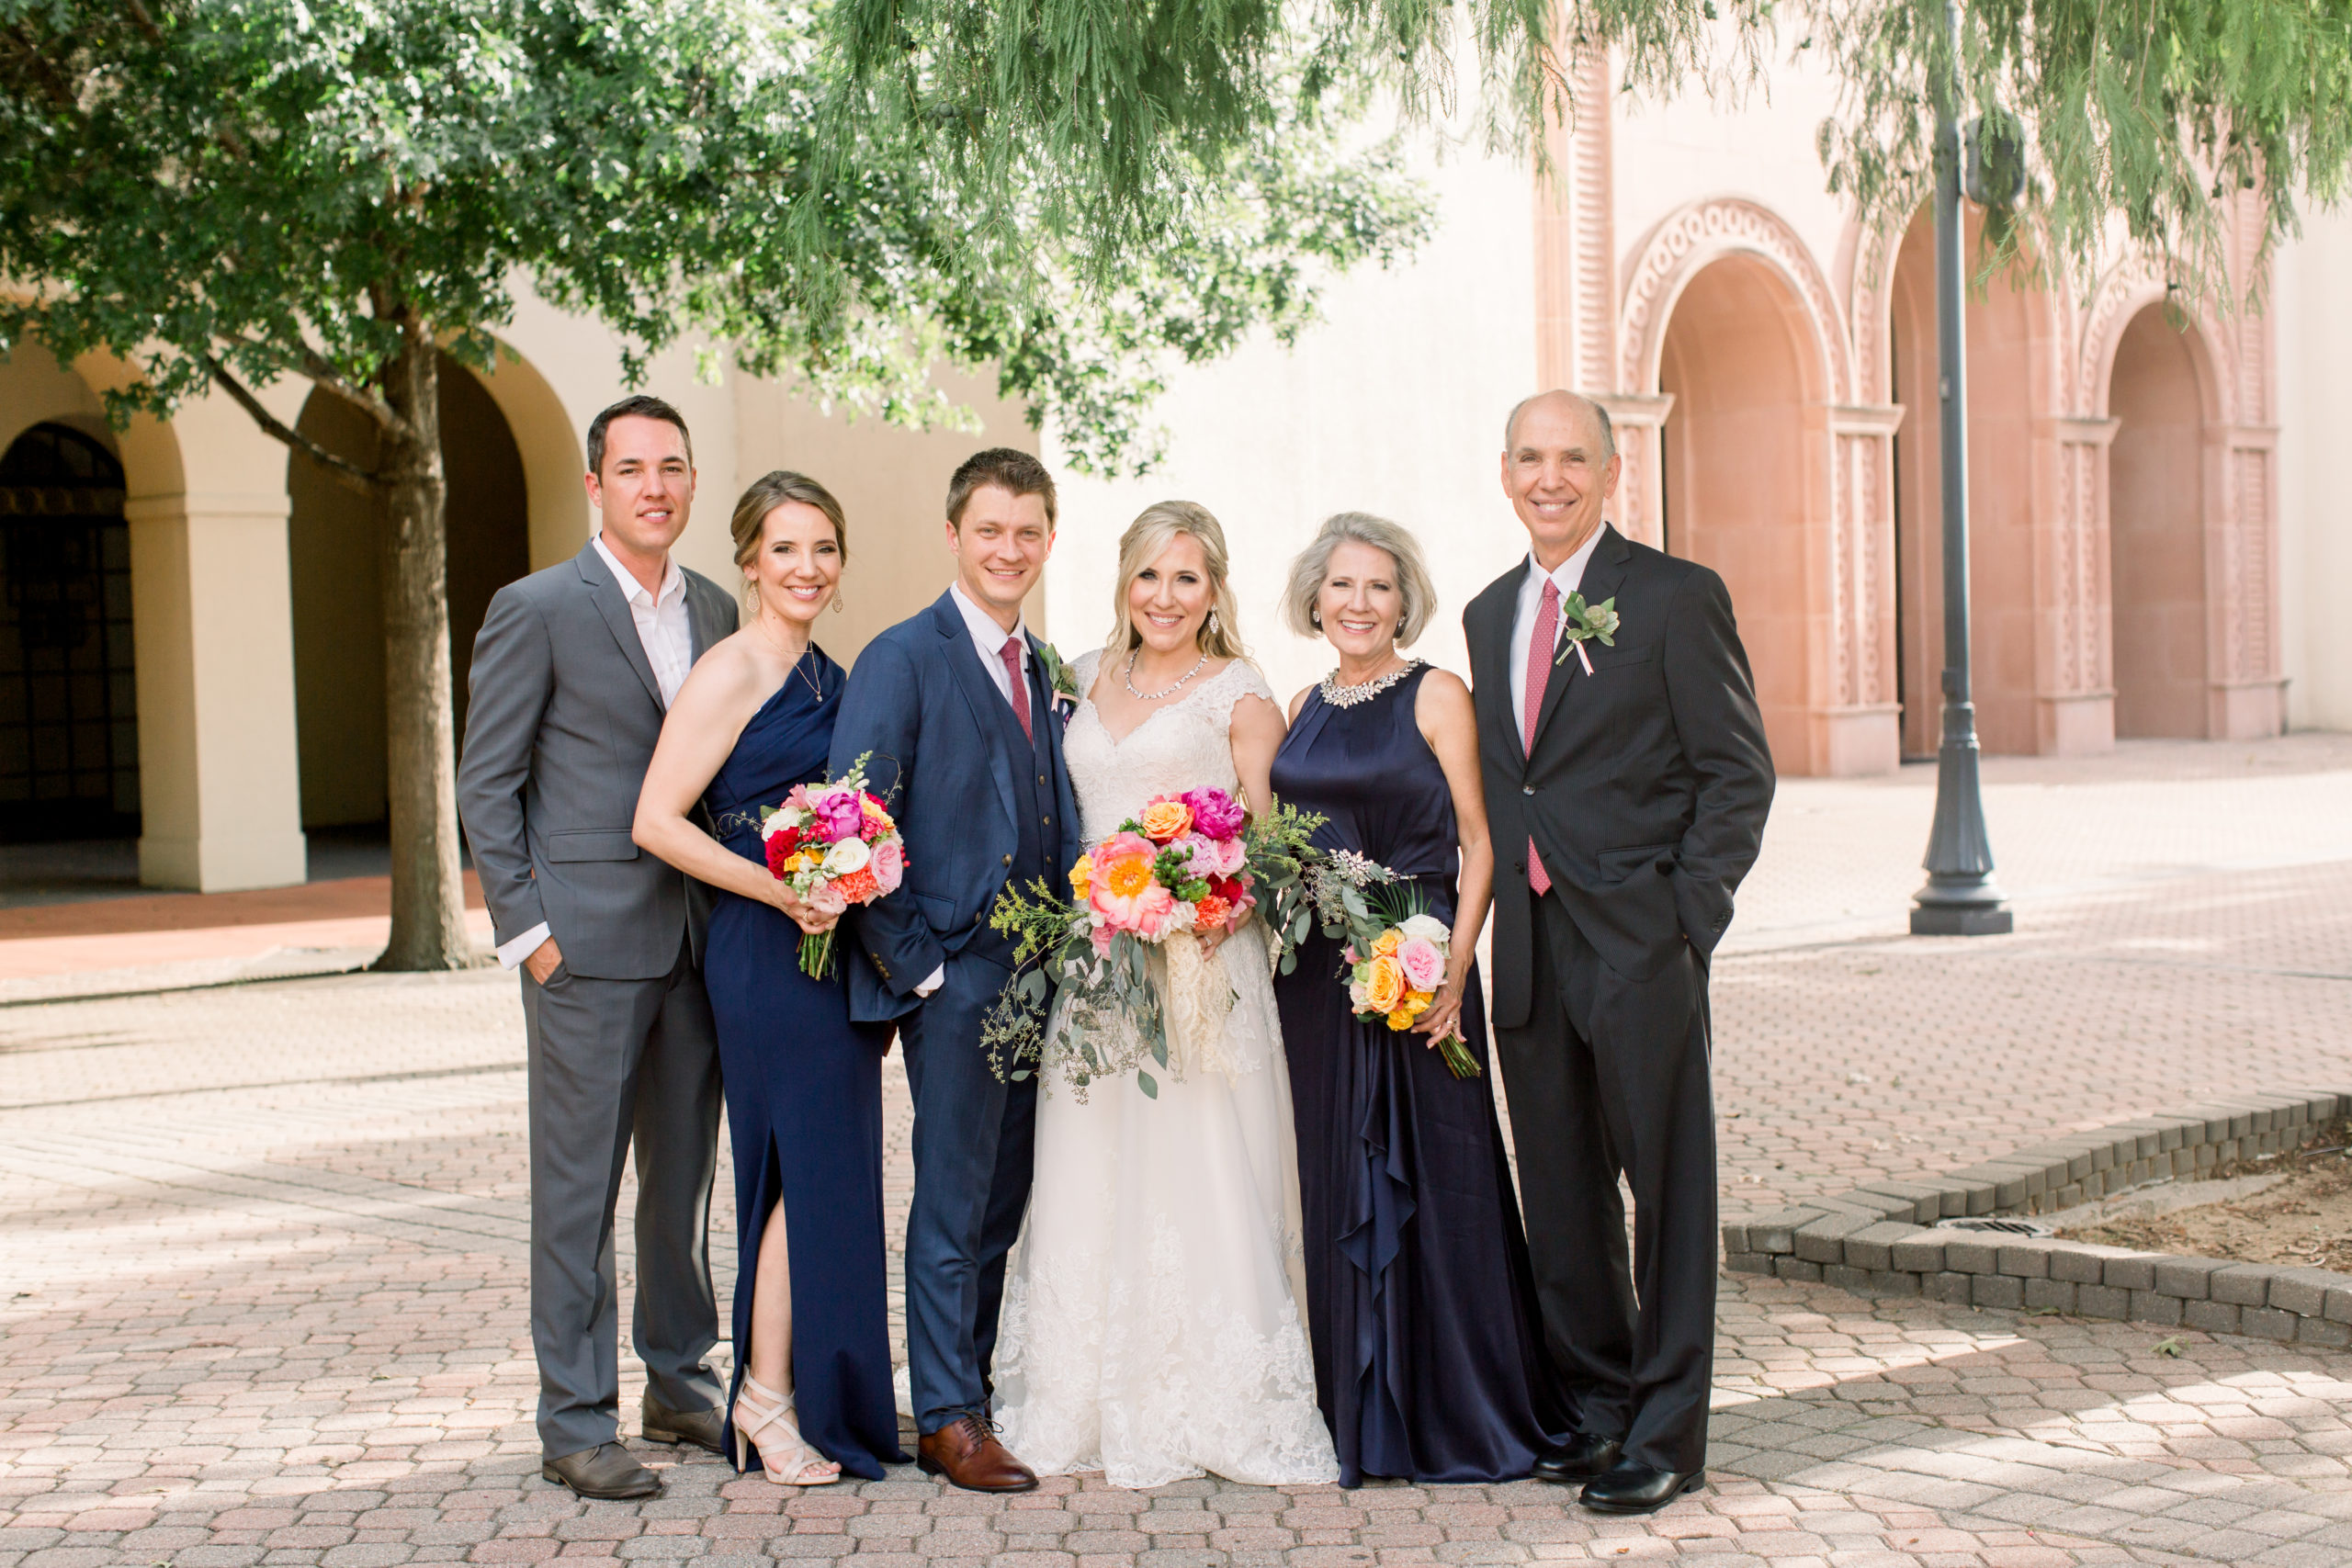 Capturing Family Formals on your Wedding Day